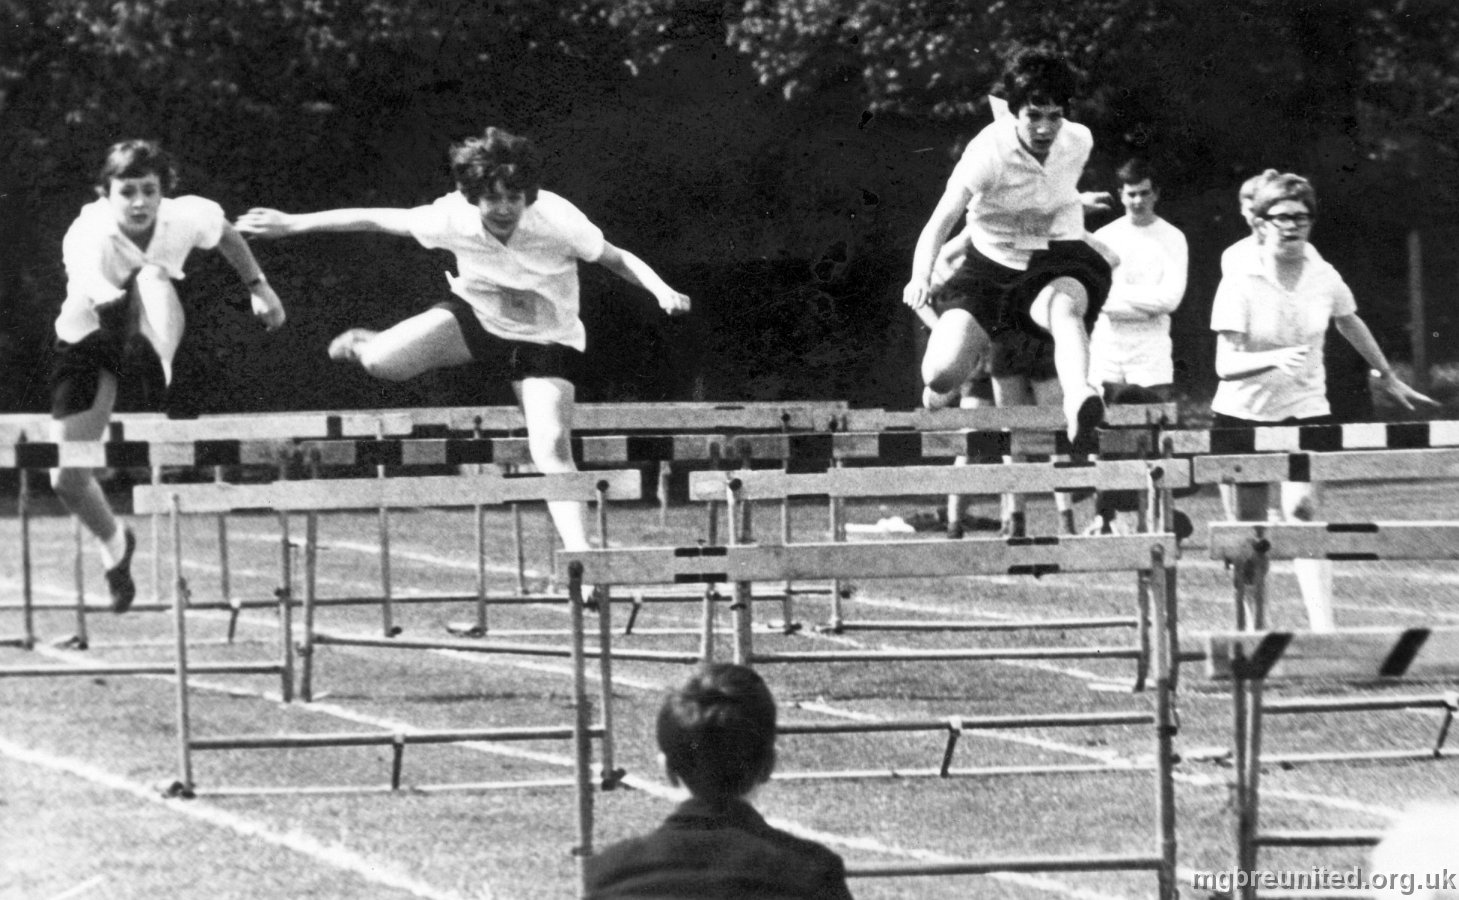 1968 Hurdles Vicky Moore, Pam McClure, Julie Williamson, Libby (Liz) Christine. John Holvey in the background.